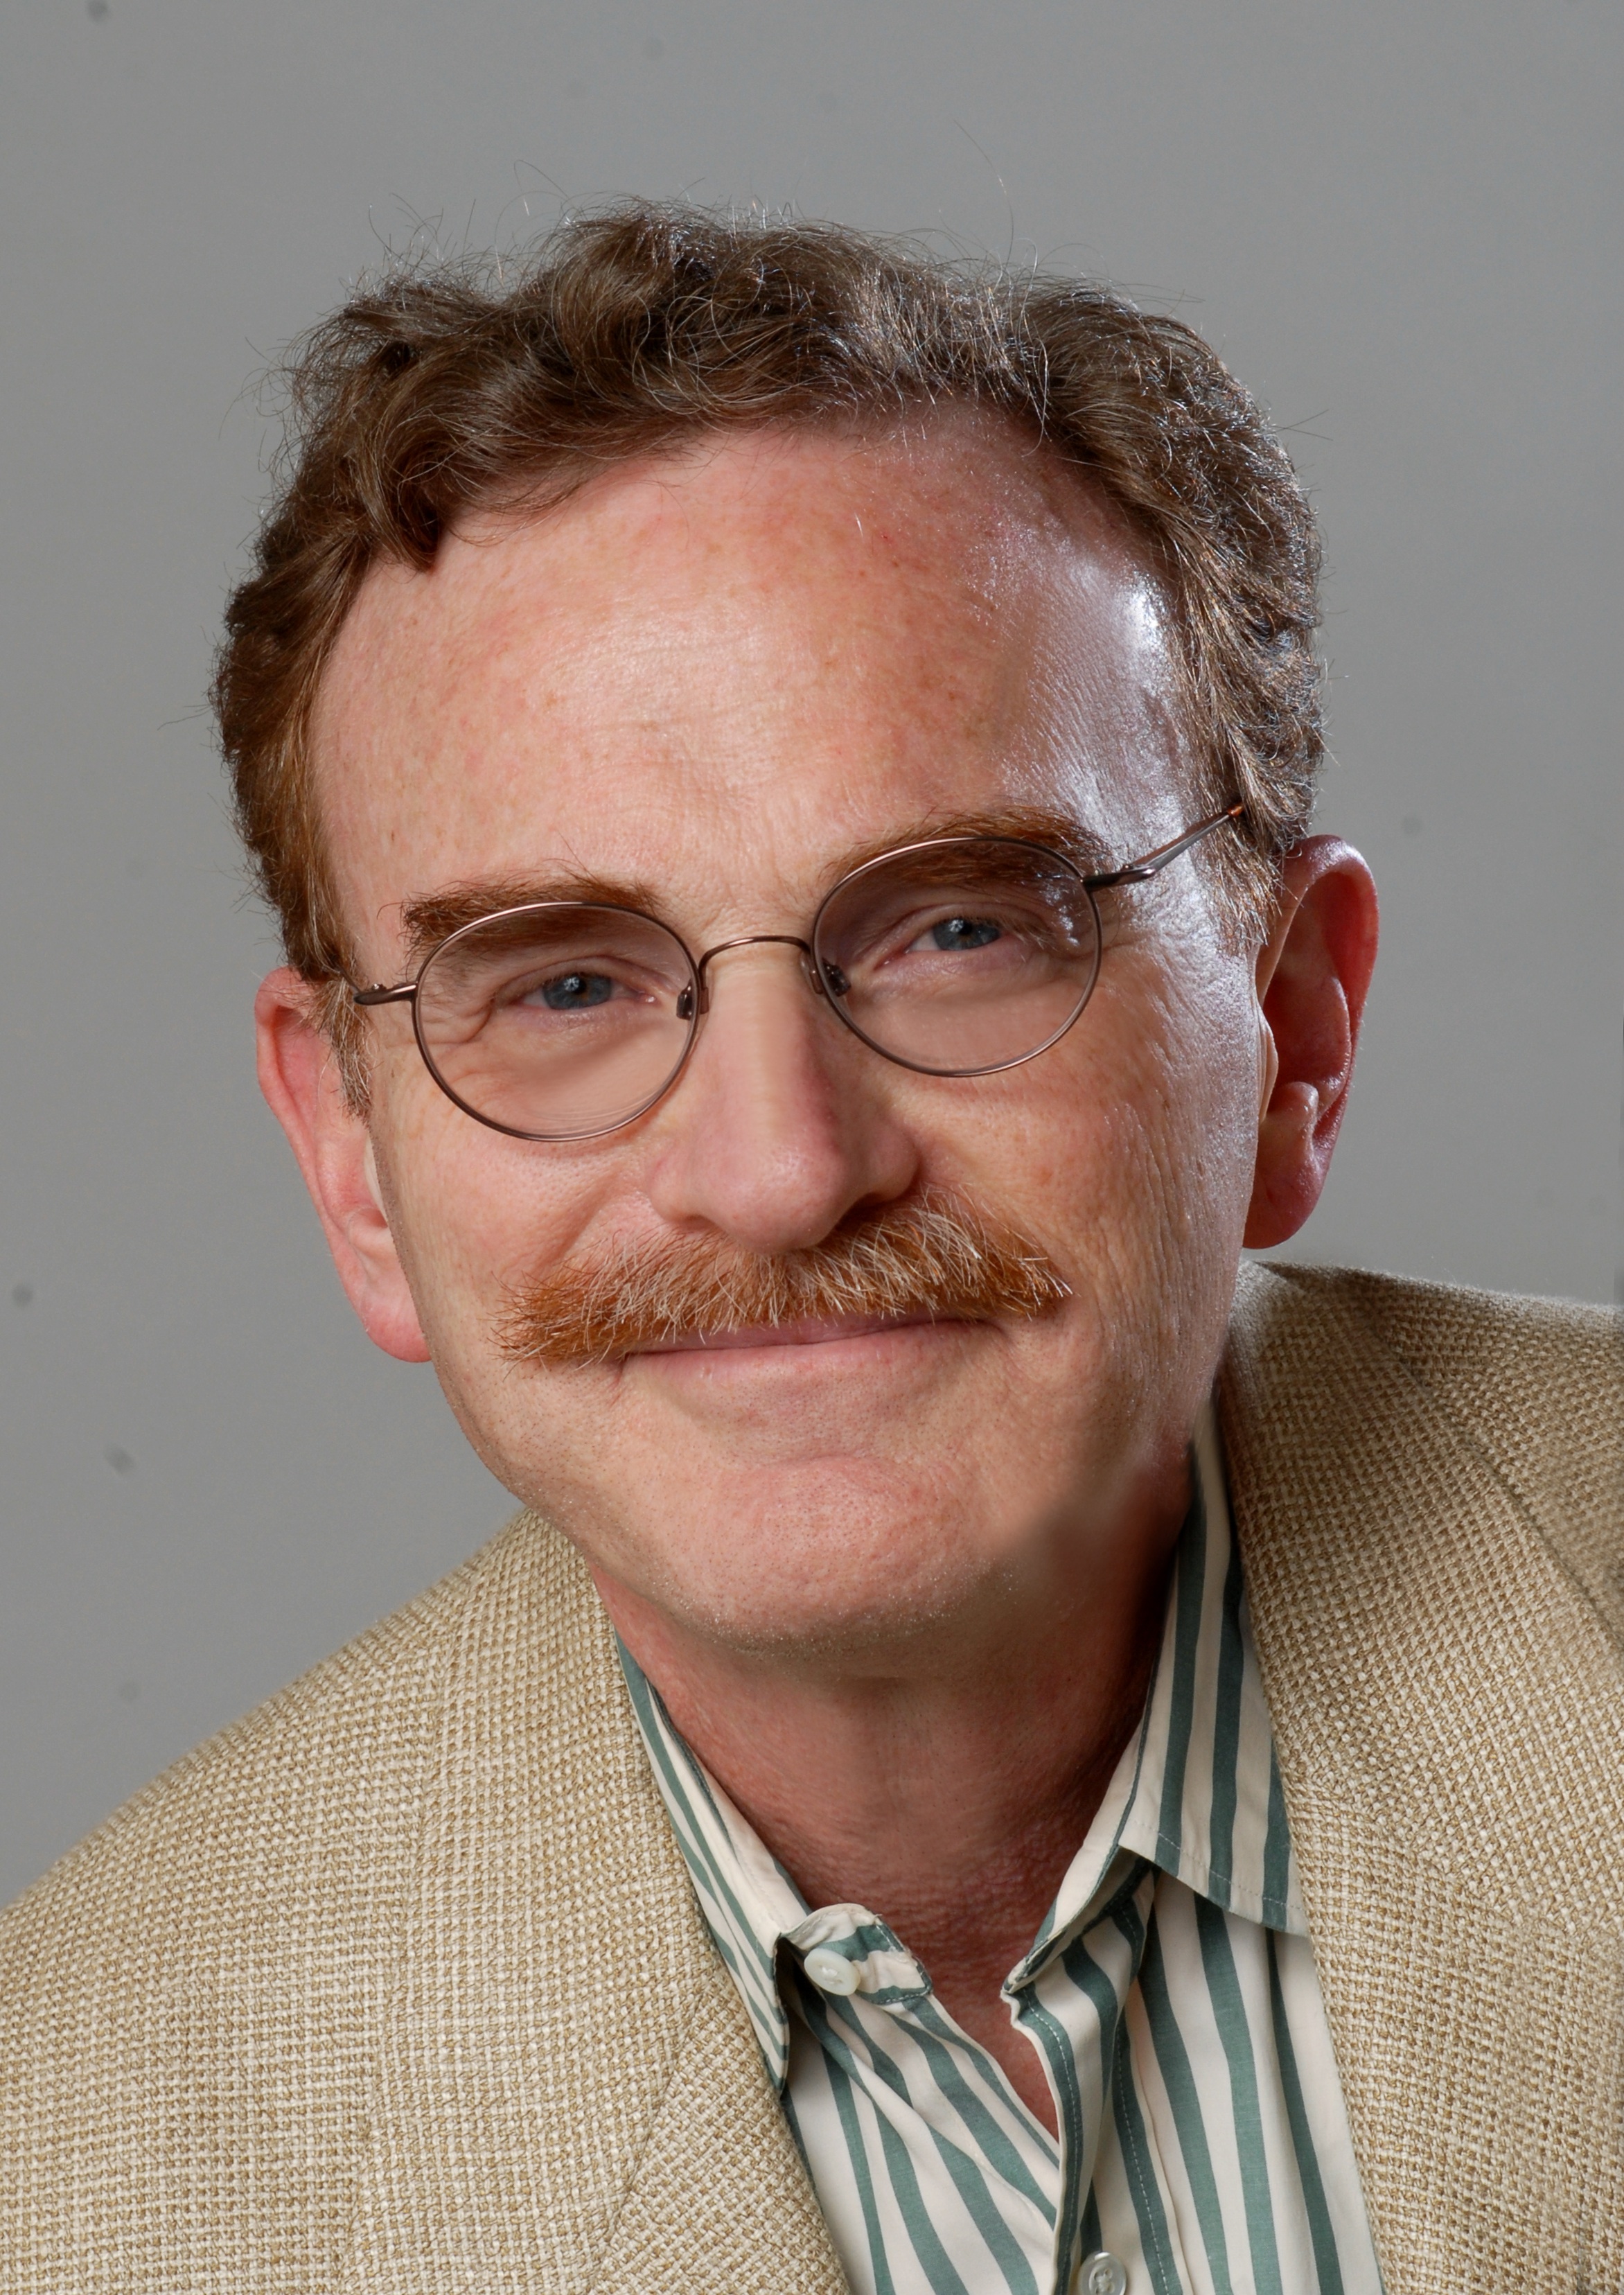 Research that shows how proteins travel in cells, with implications to develop vaccines and produce human insulin, led to him being awarded the Nobel Prize in Physiology or Medicine in 2013. In April, Randy Schekman will bring his knowledge and experiences to the University of North Texas for two lectures.